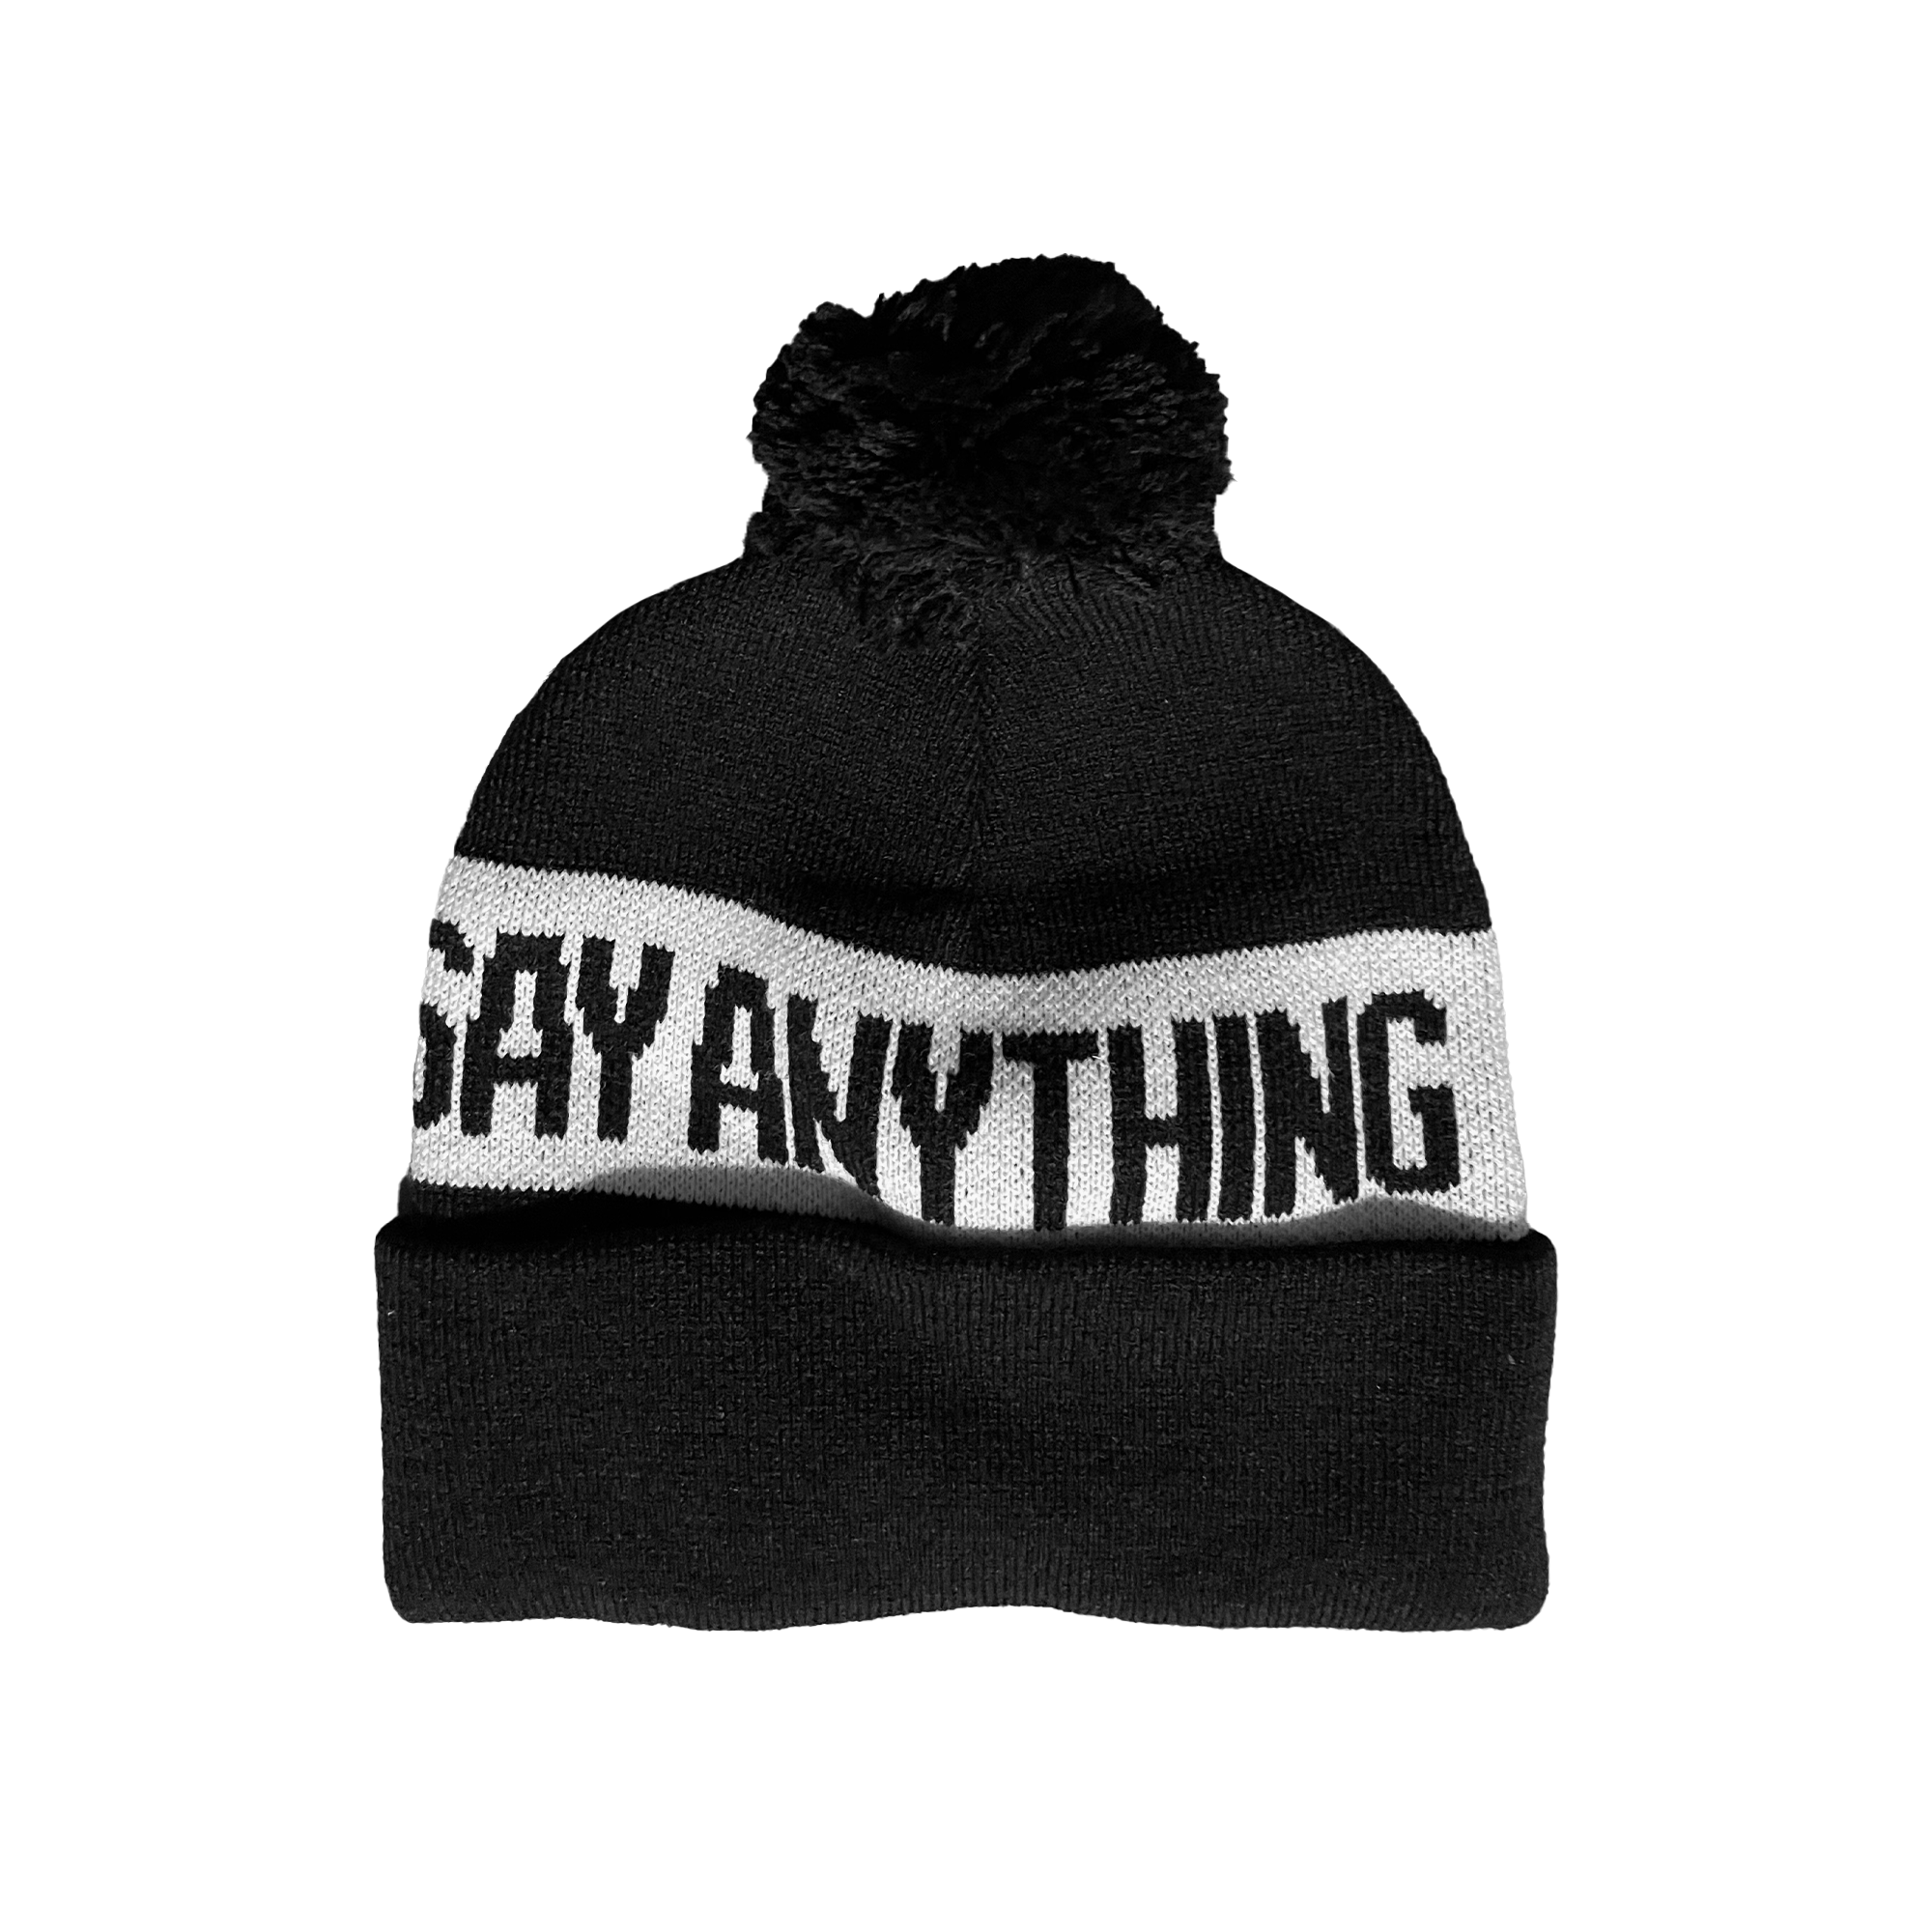 Say Anything - Knit Beanie